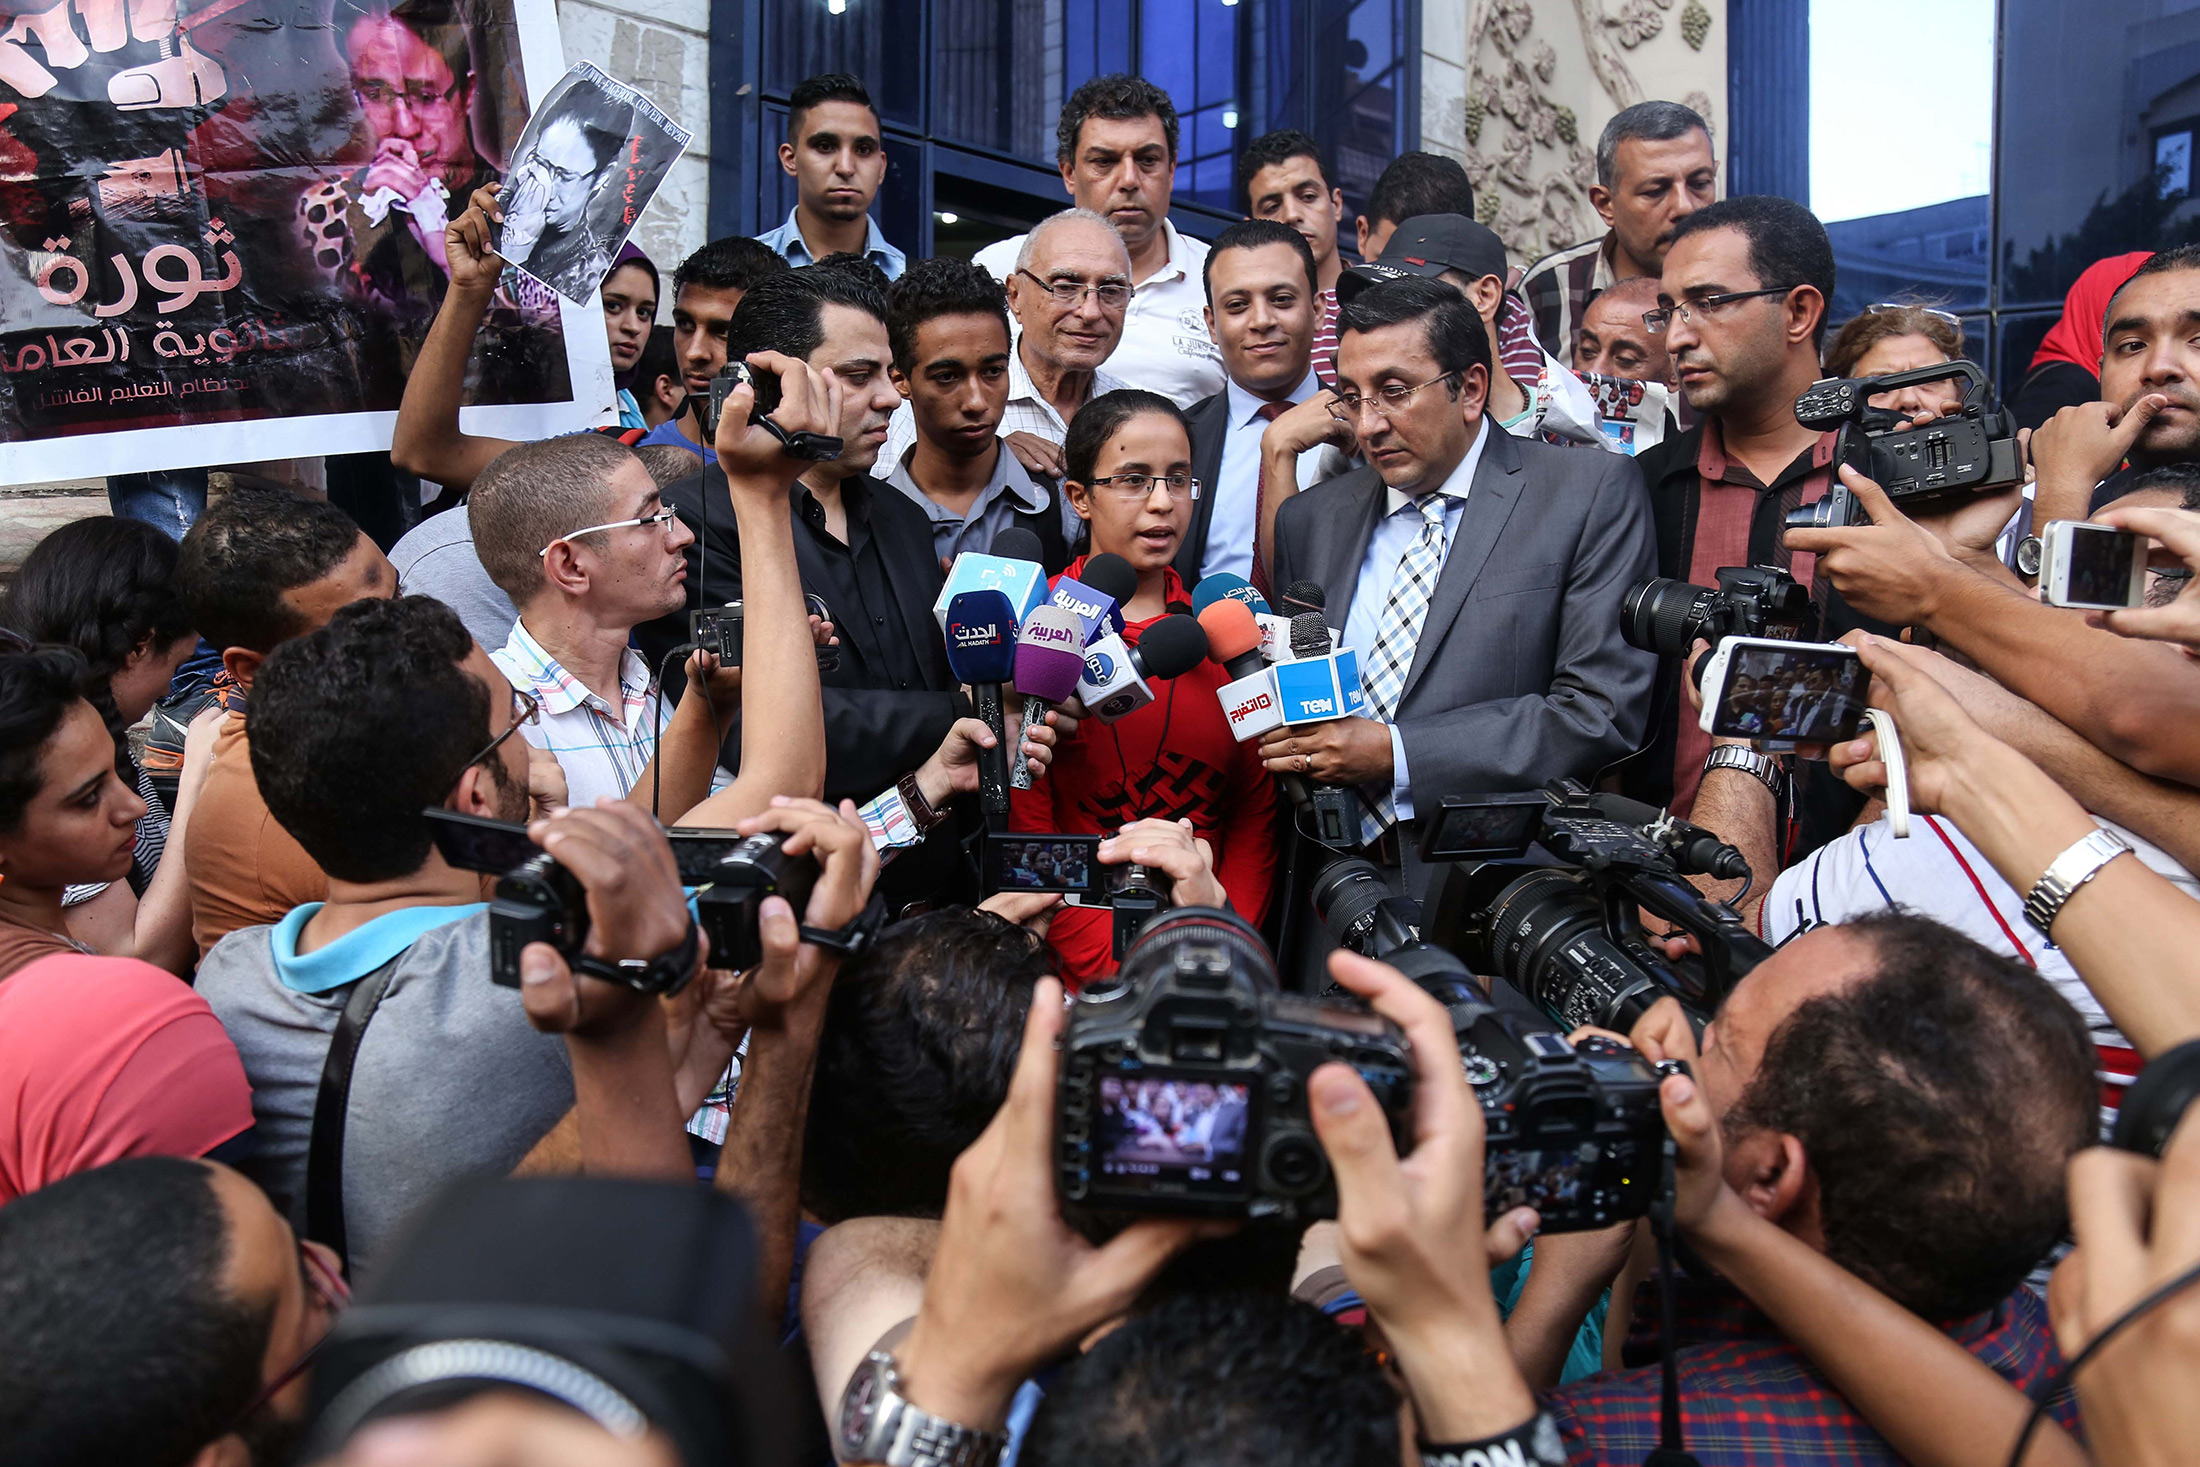 Egyptian student Mariam Malak, 19, talks to the press in Cairo on Sept. 17.
